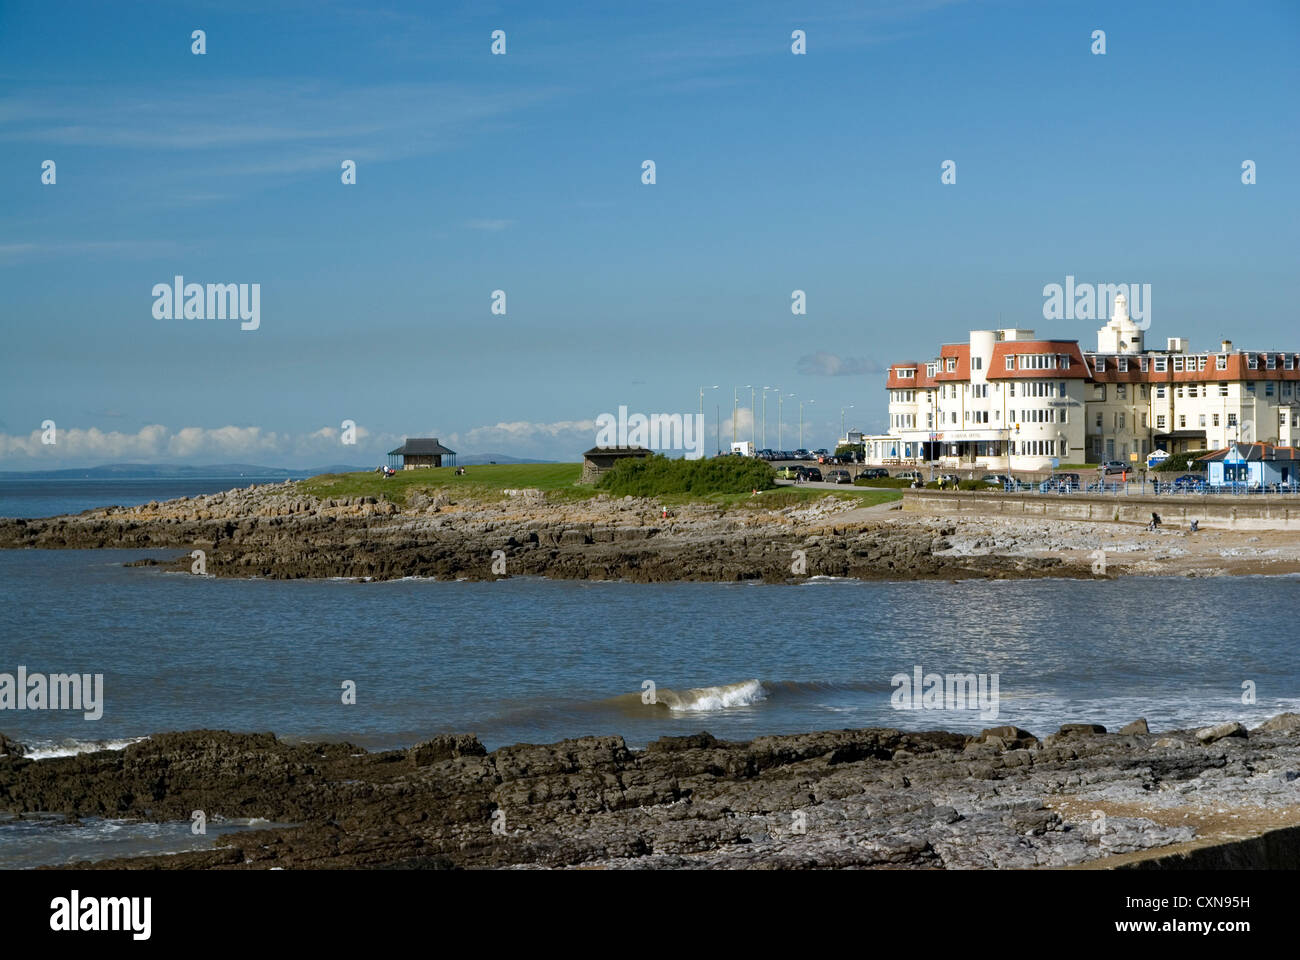 Town Beach and Seabank Hotel, Porthcawl, South Wales, UK. Stock Photo